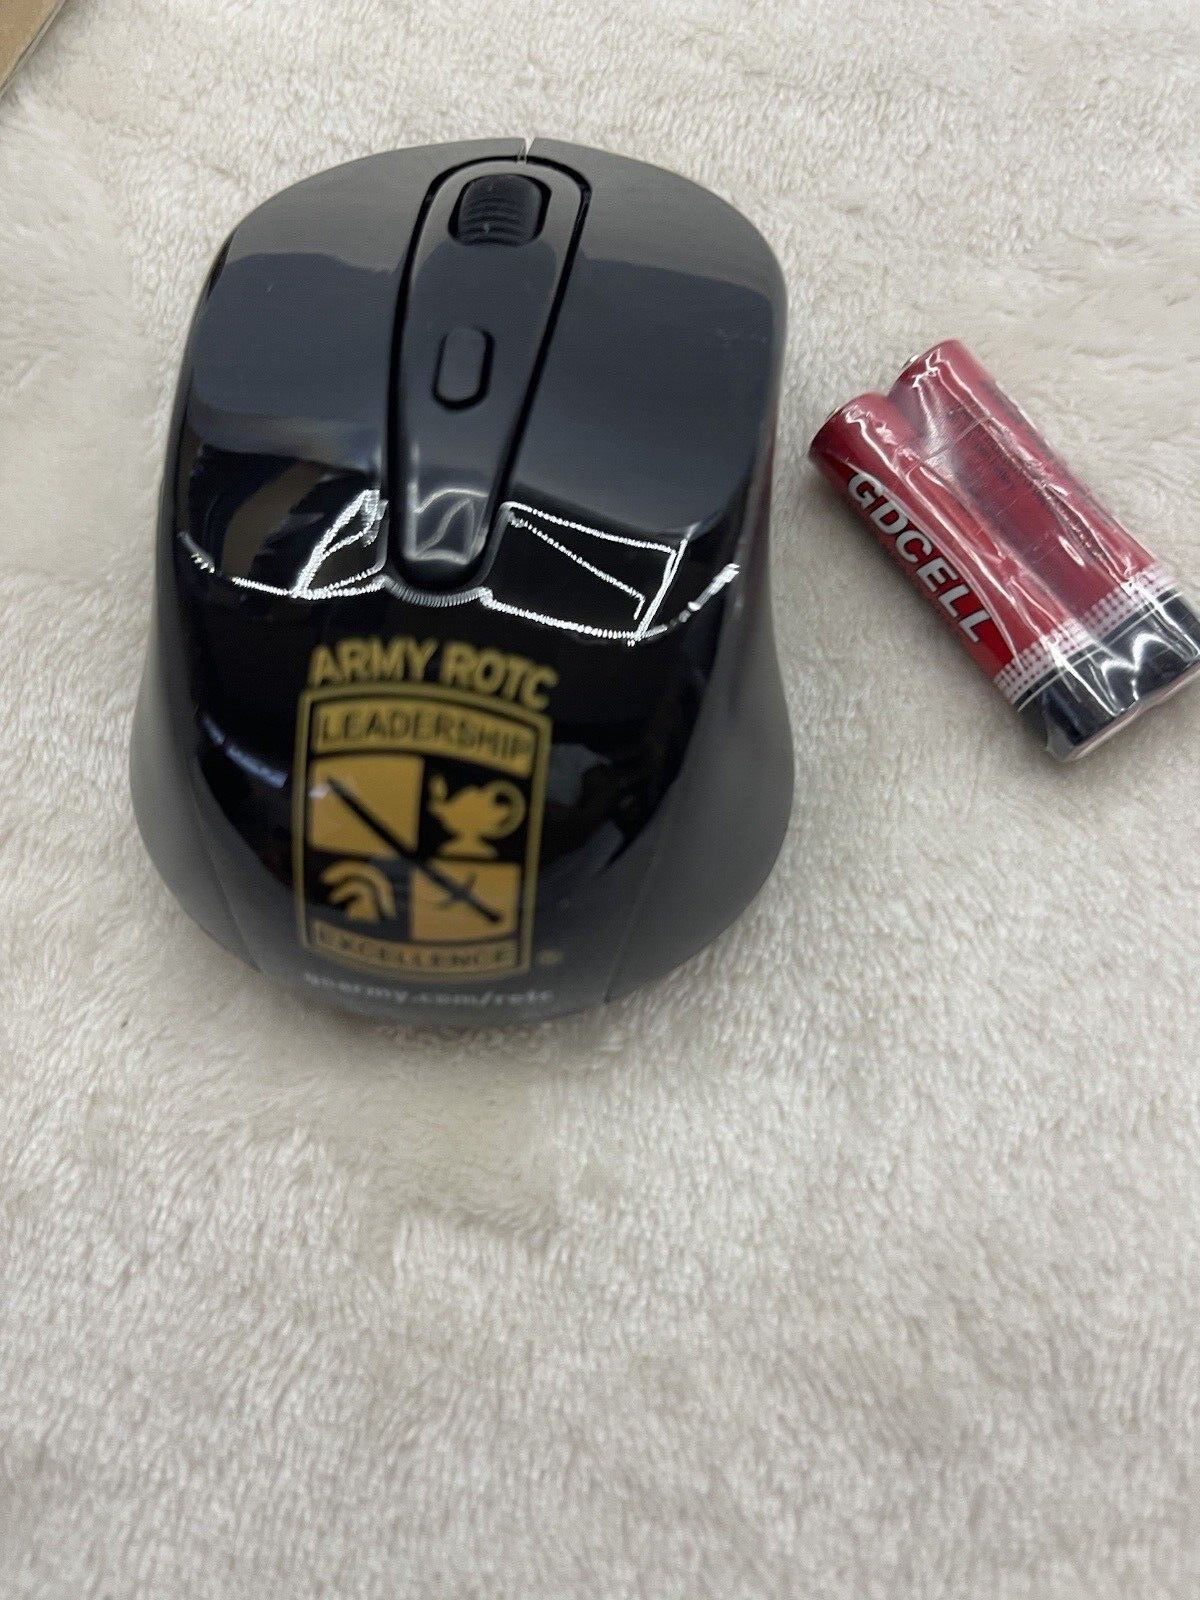 US ARMY ROTC Computer Mouse Black Gold Wireless